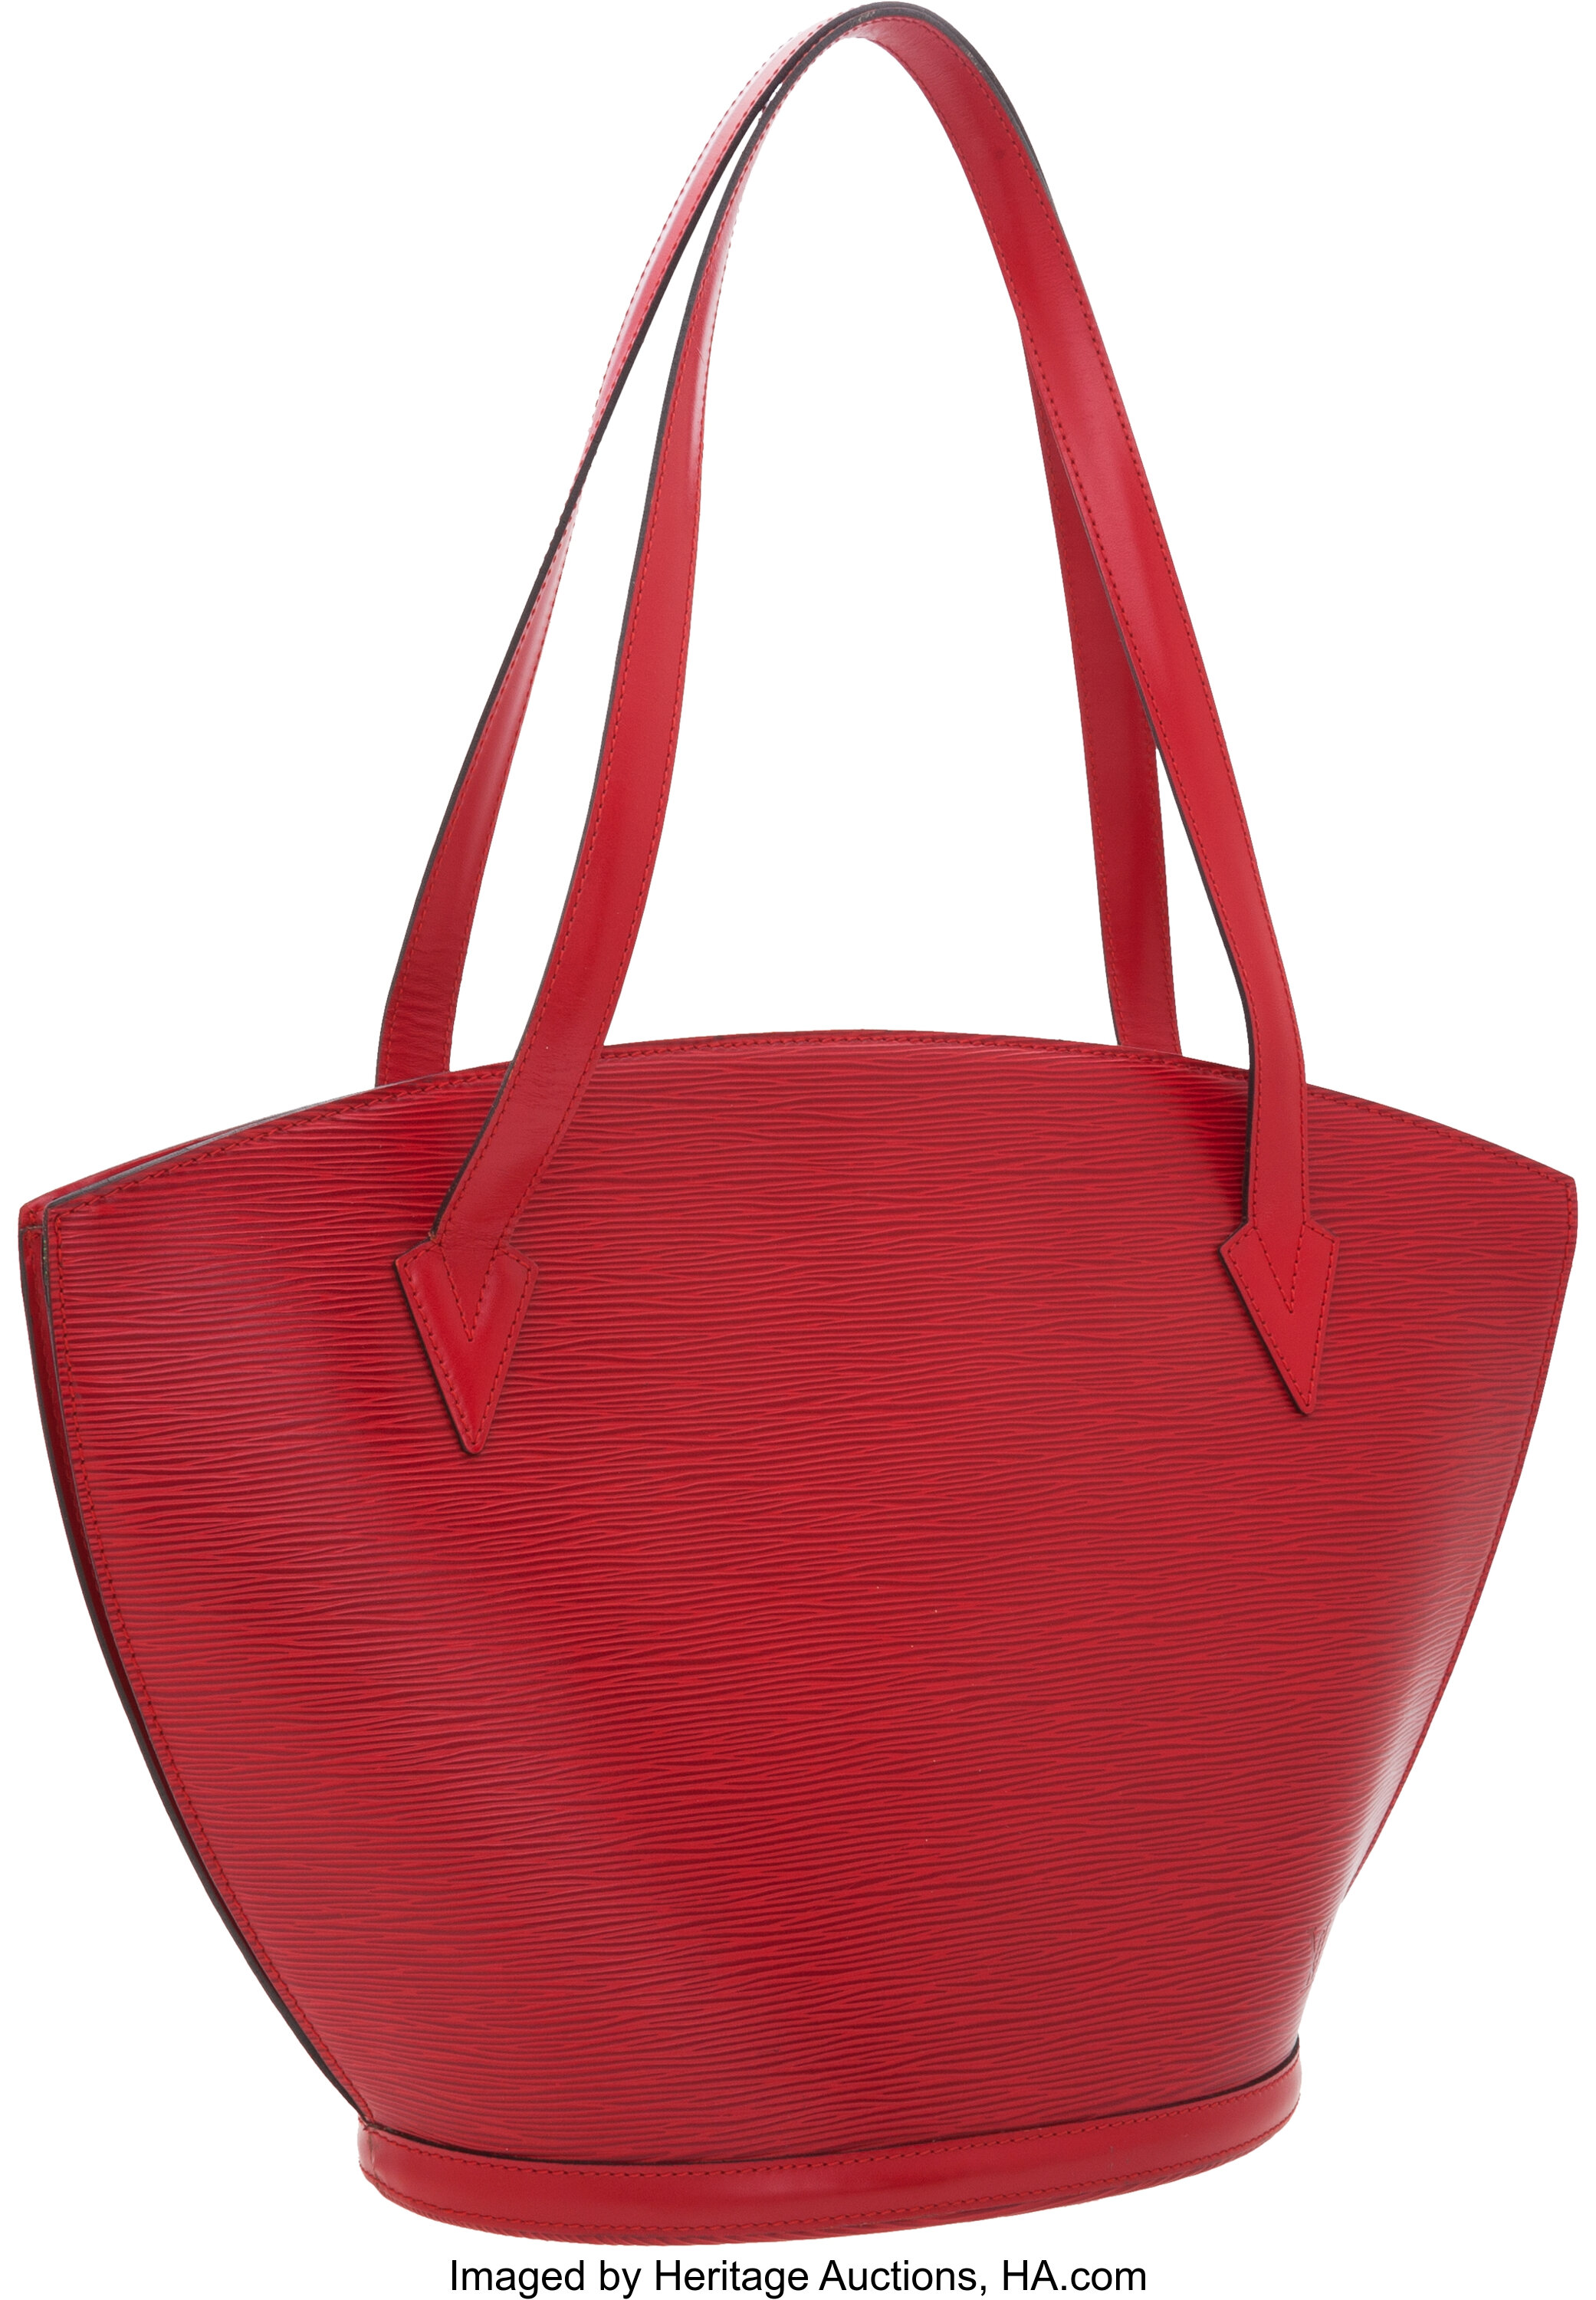 Sold at Auction: A Louis Vuitton Small Red Textured Epi Leather